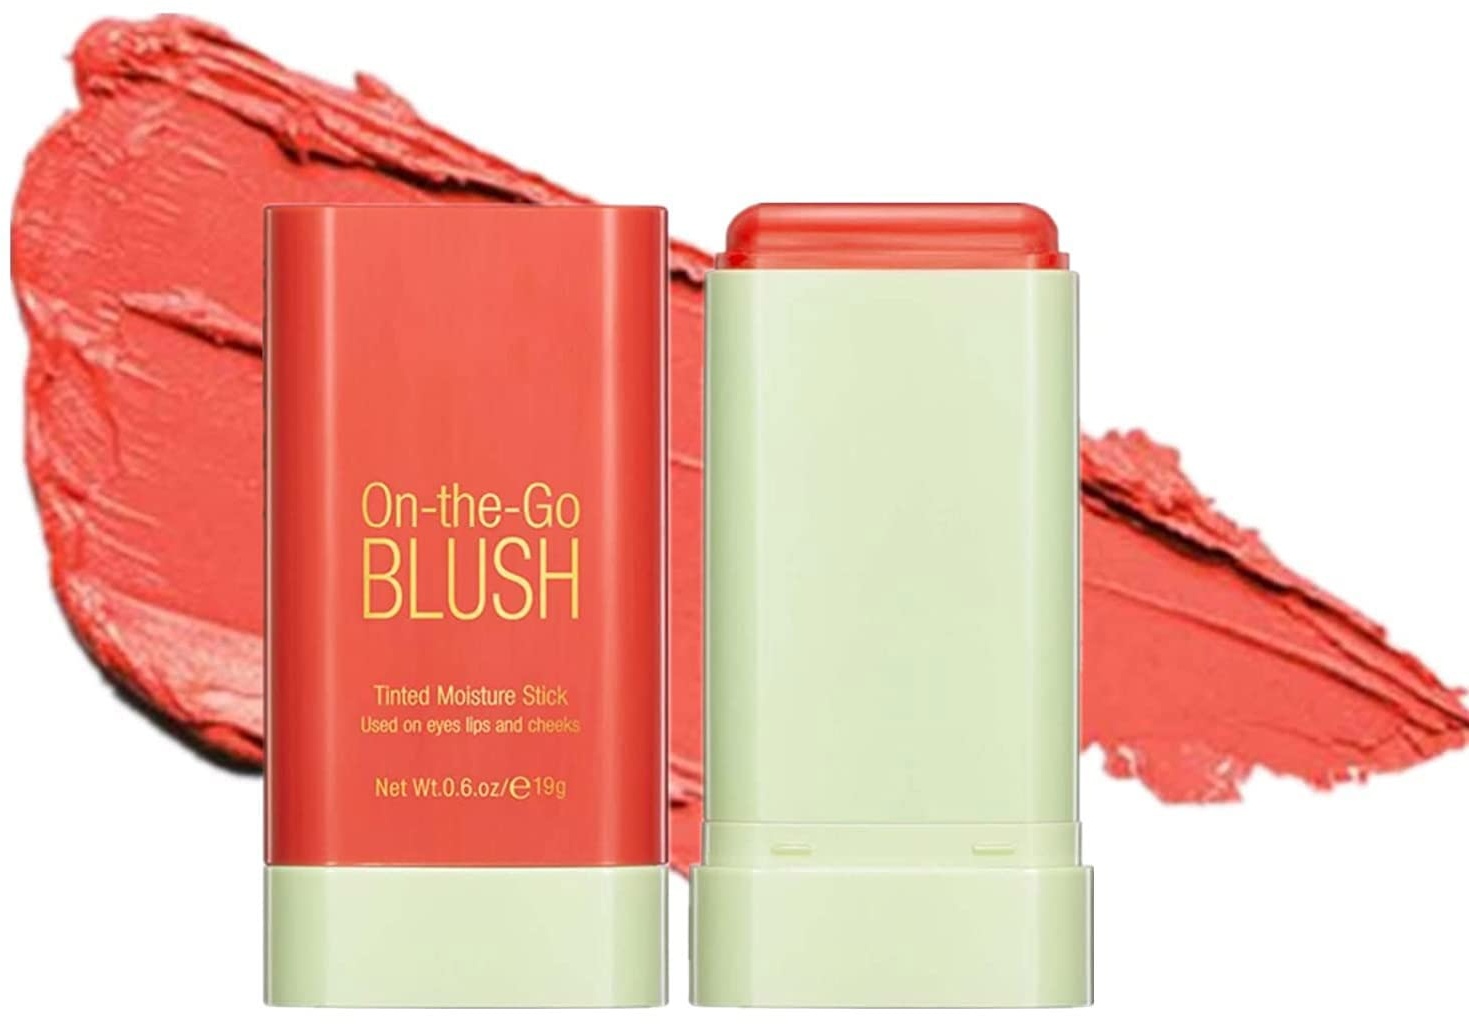 On-the-Go Makeup Blush Stick, Long Lasting Natural Nude Makeup, Tinted Moisture Stick, Shadow Lips Cheek Waterproof Creamy Makeup, for All Skin Types (Coral Orange)